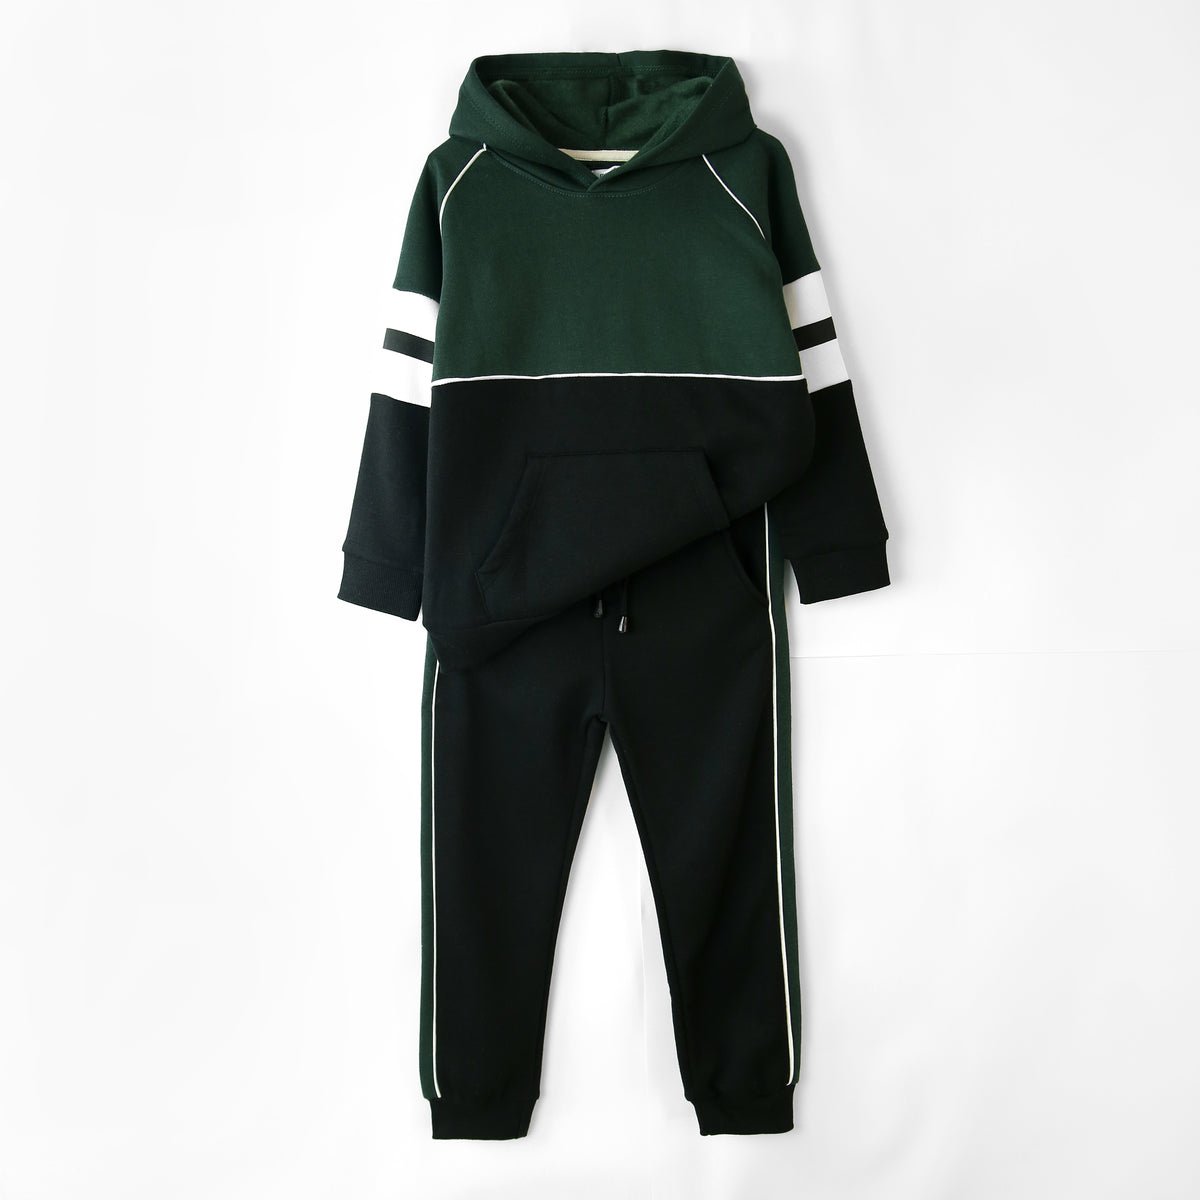 Premium Quality Cut &amp; Sew Style Fleece Tracksuit For Kids